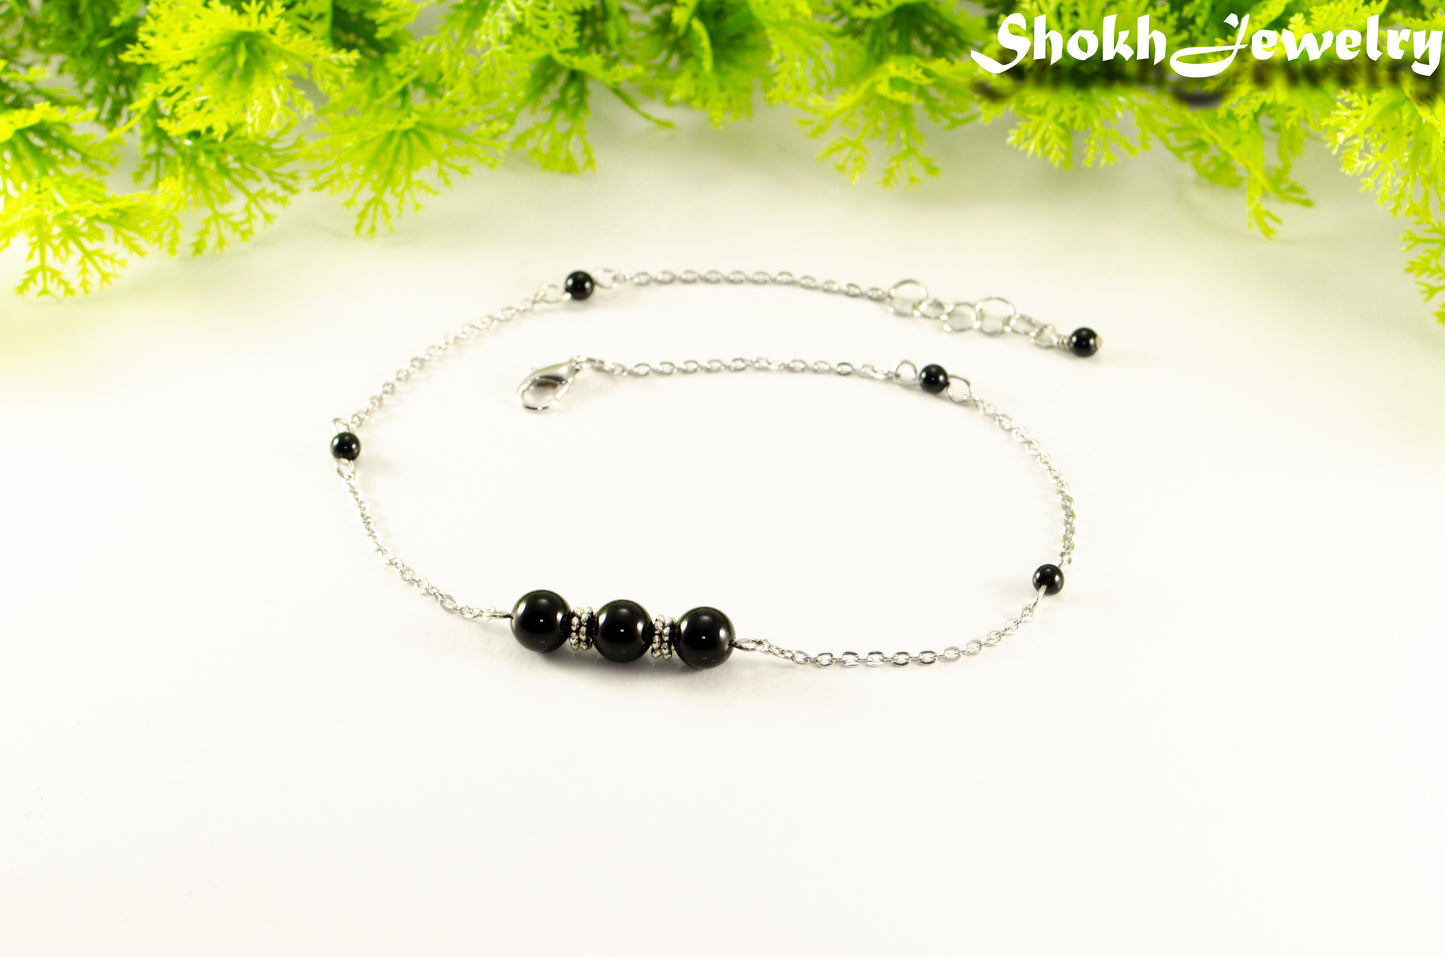 Natural Black Onyx and Chain Choker Necklace for women.